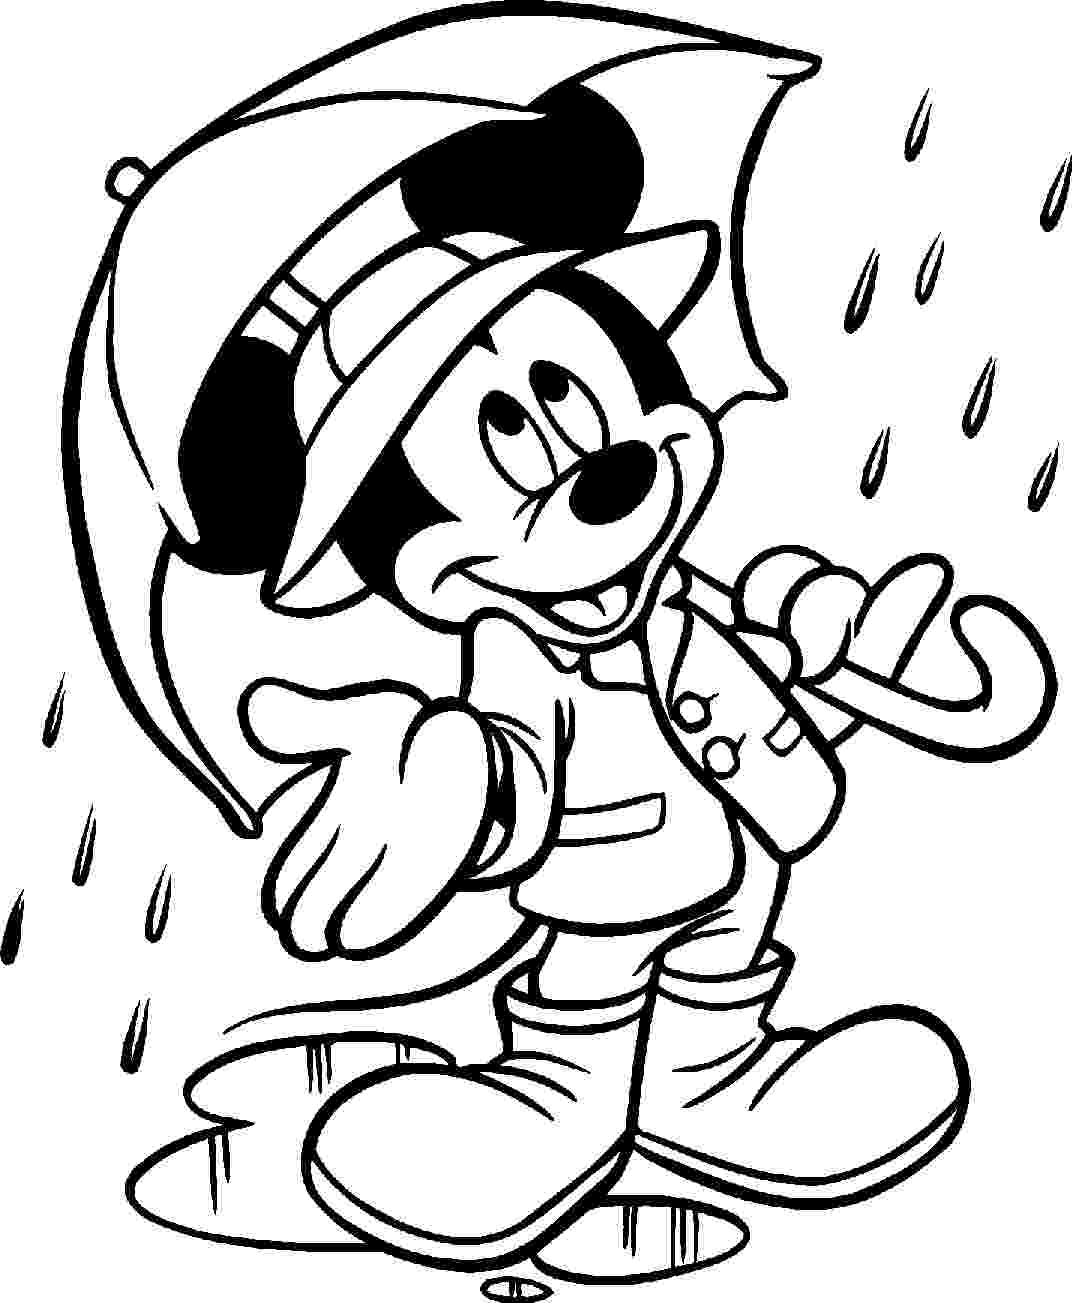 mickey mouse coloring pictures mickey mouse coloring pages 2018 dr odd mouse coloring pictures mickey 